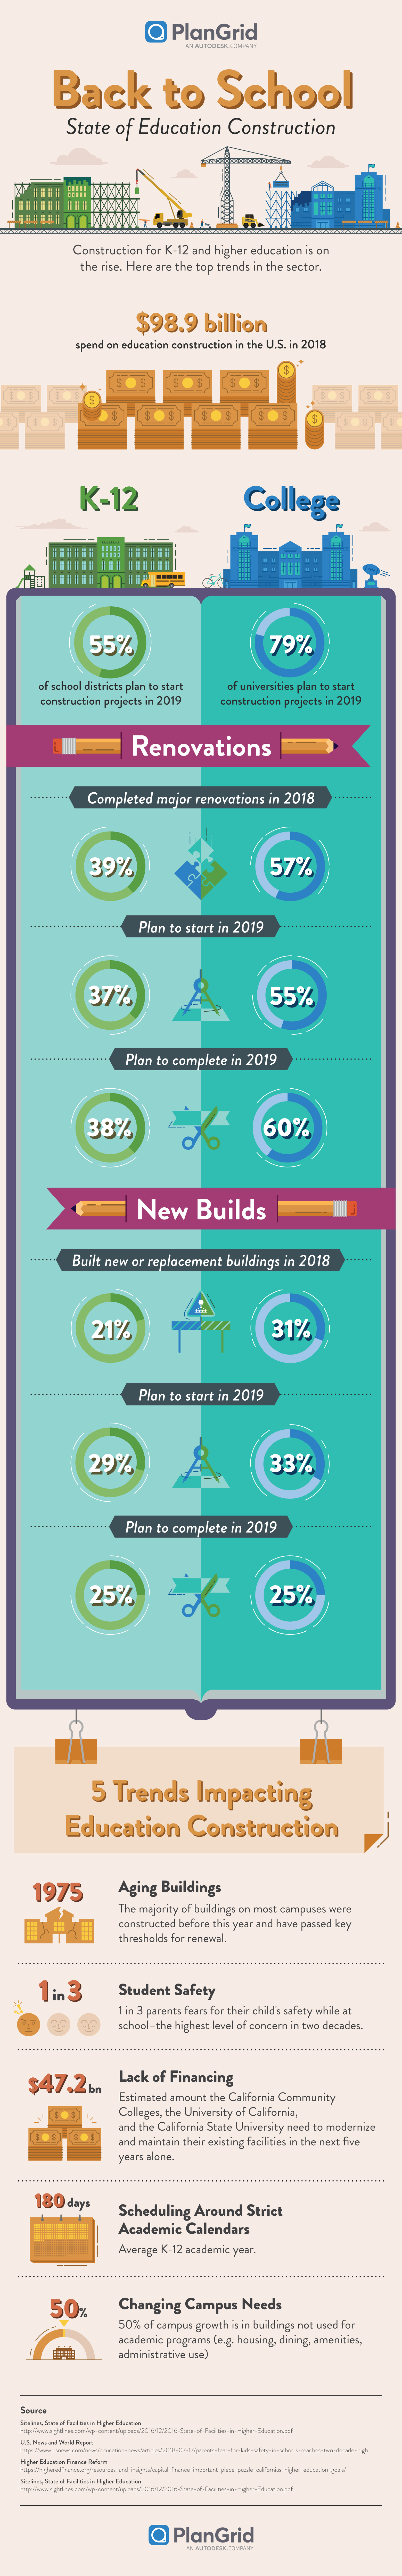 Education Construction in 2019 - state of the market